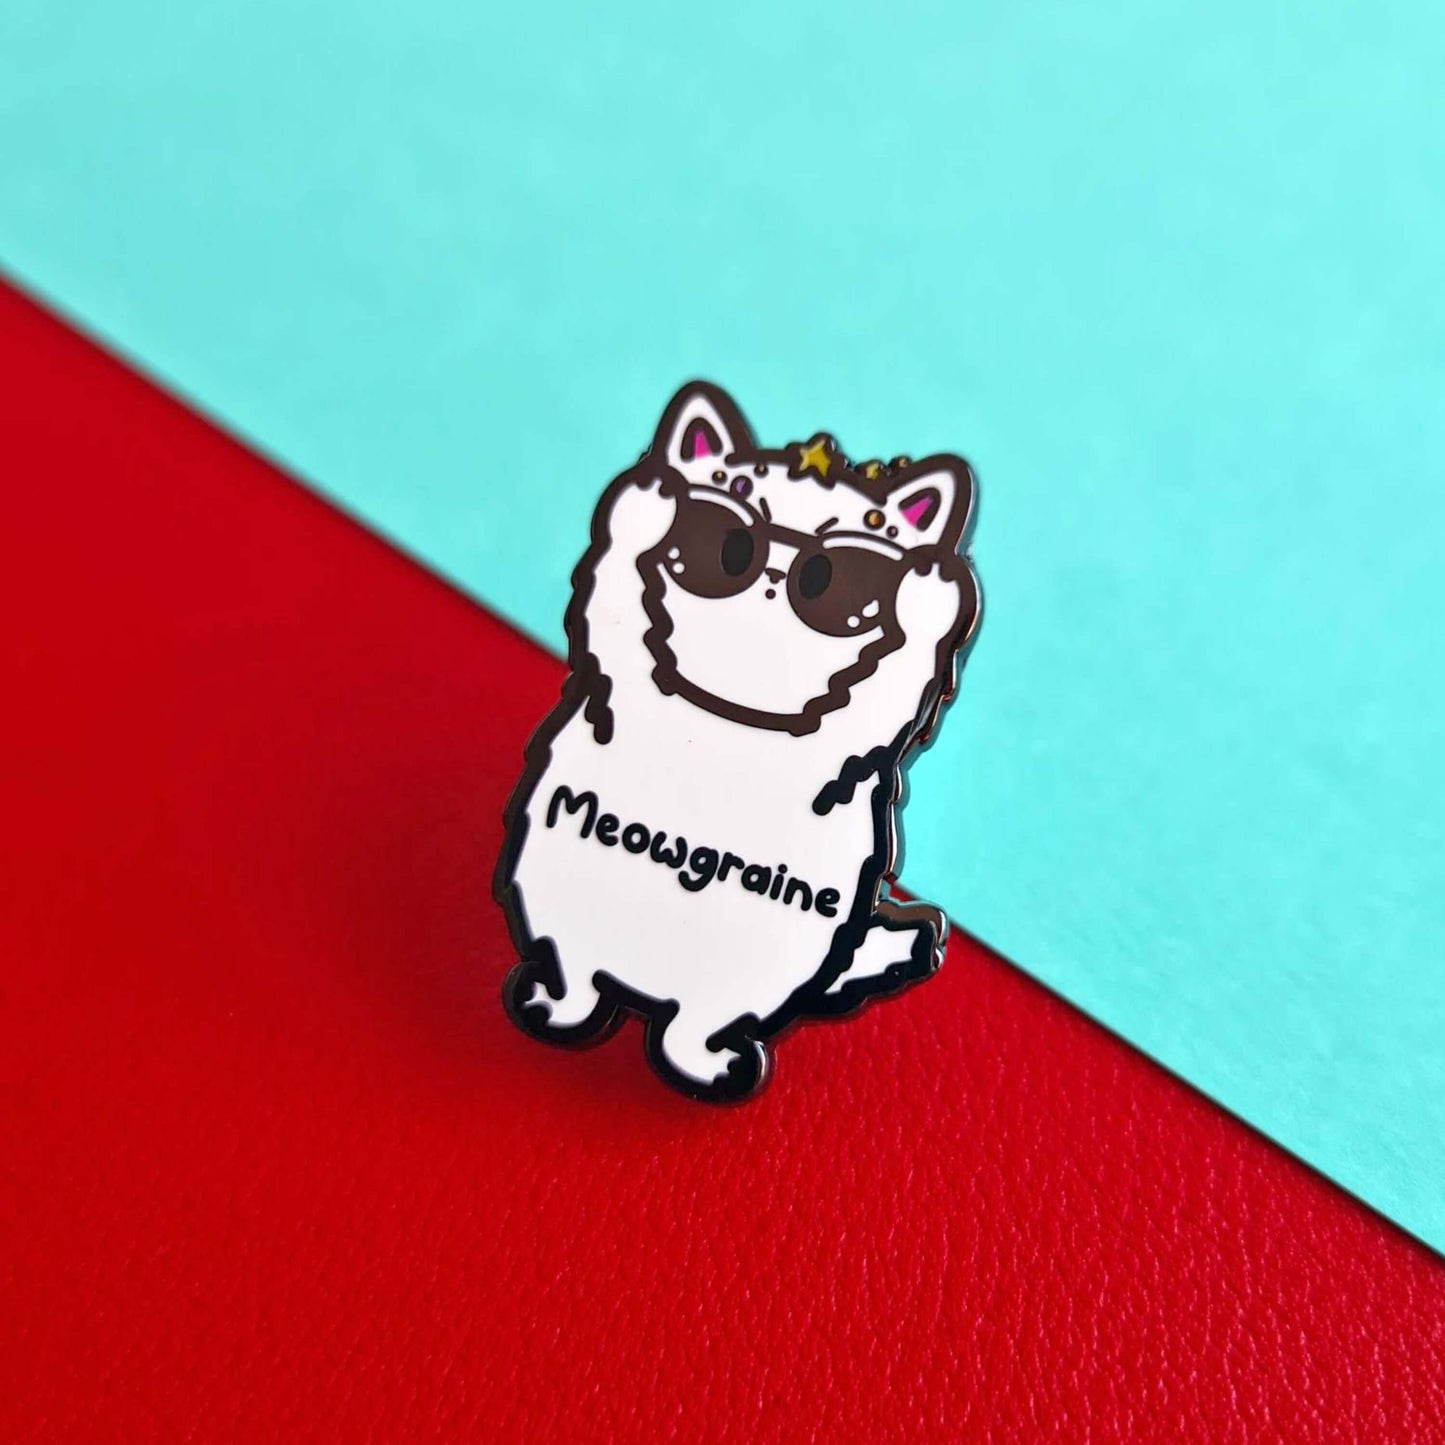 The Meowgraine Cat Enamel Pin - Migraine on a red and blue background. A white stressed cat clutching a pair of black sunglasses to its eyes with multicoloured spots and stars over its head, across its middle reads 'meowgraine'. The hand drawn design is raising awareness for migraines and headaches.